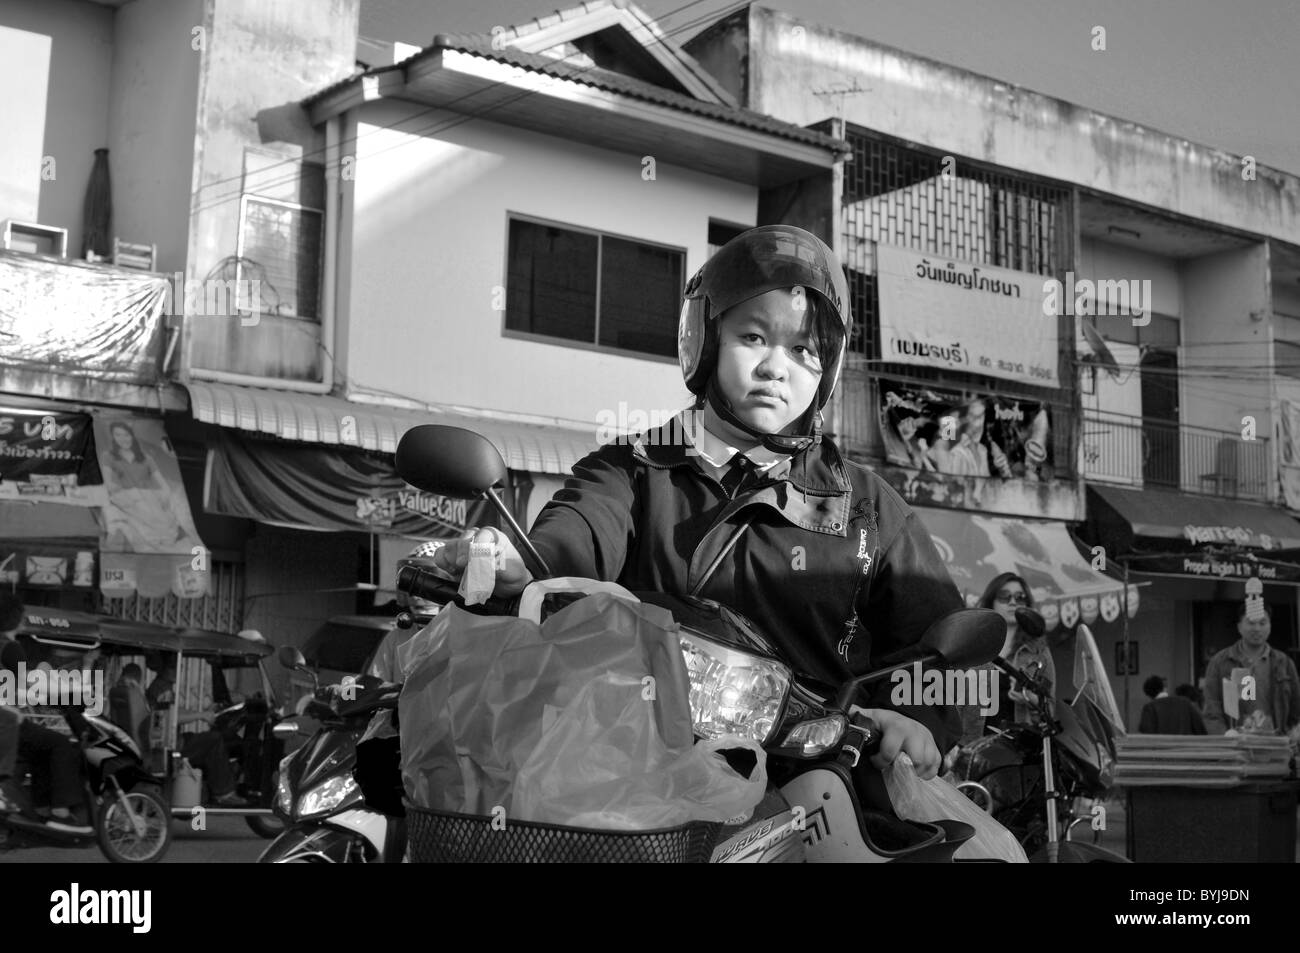 Black and white photograph of a young Thai woman on a motorbike Stock Photo